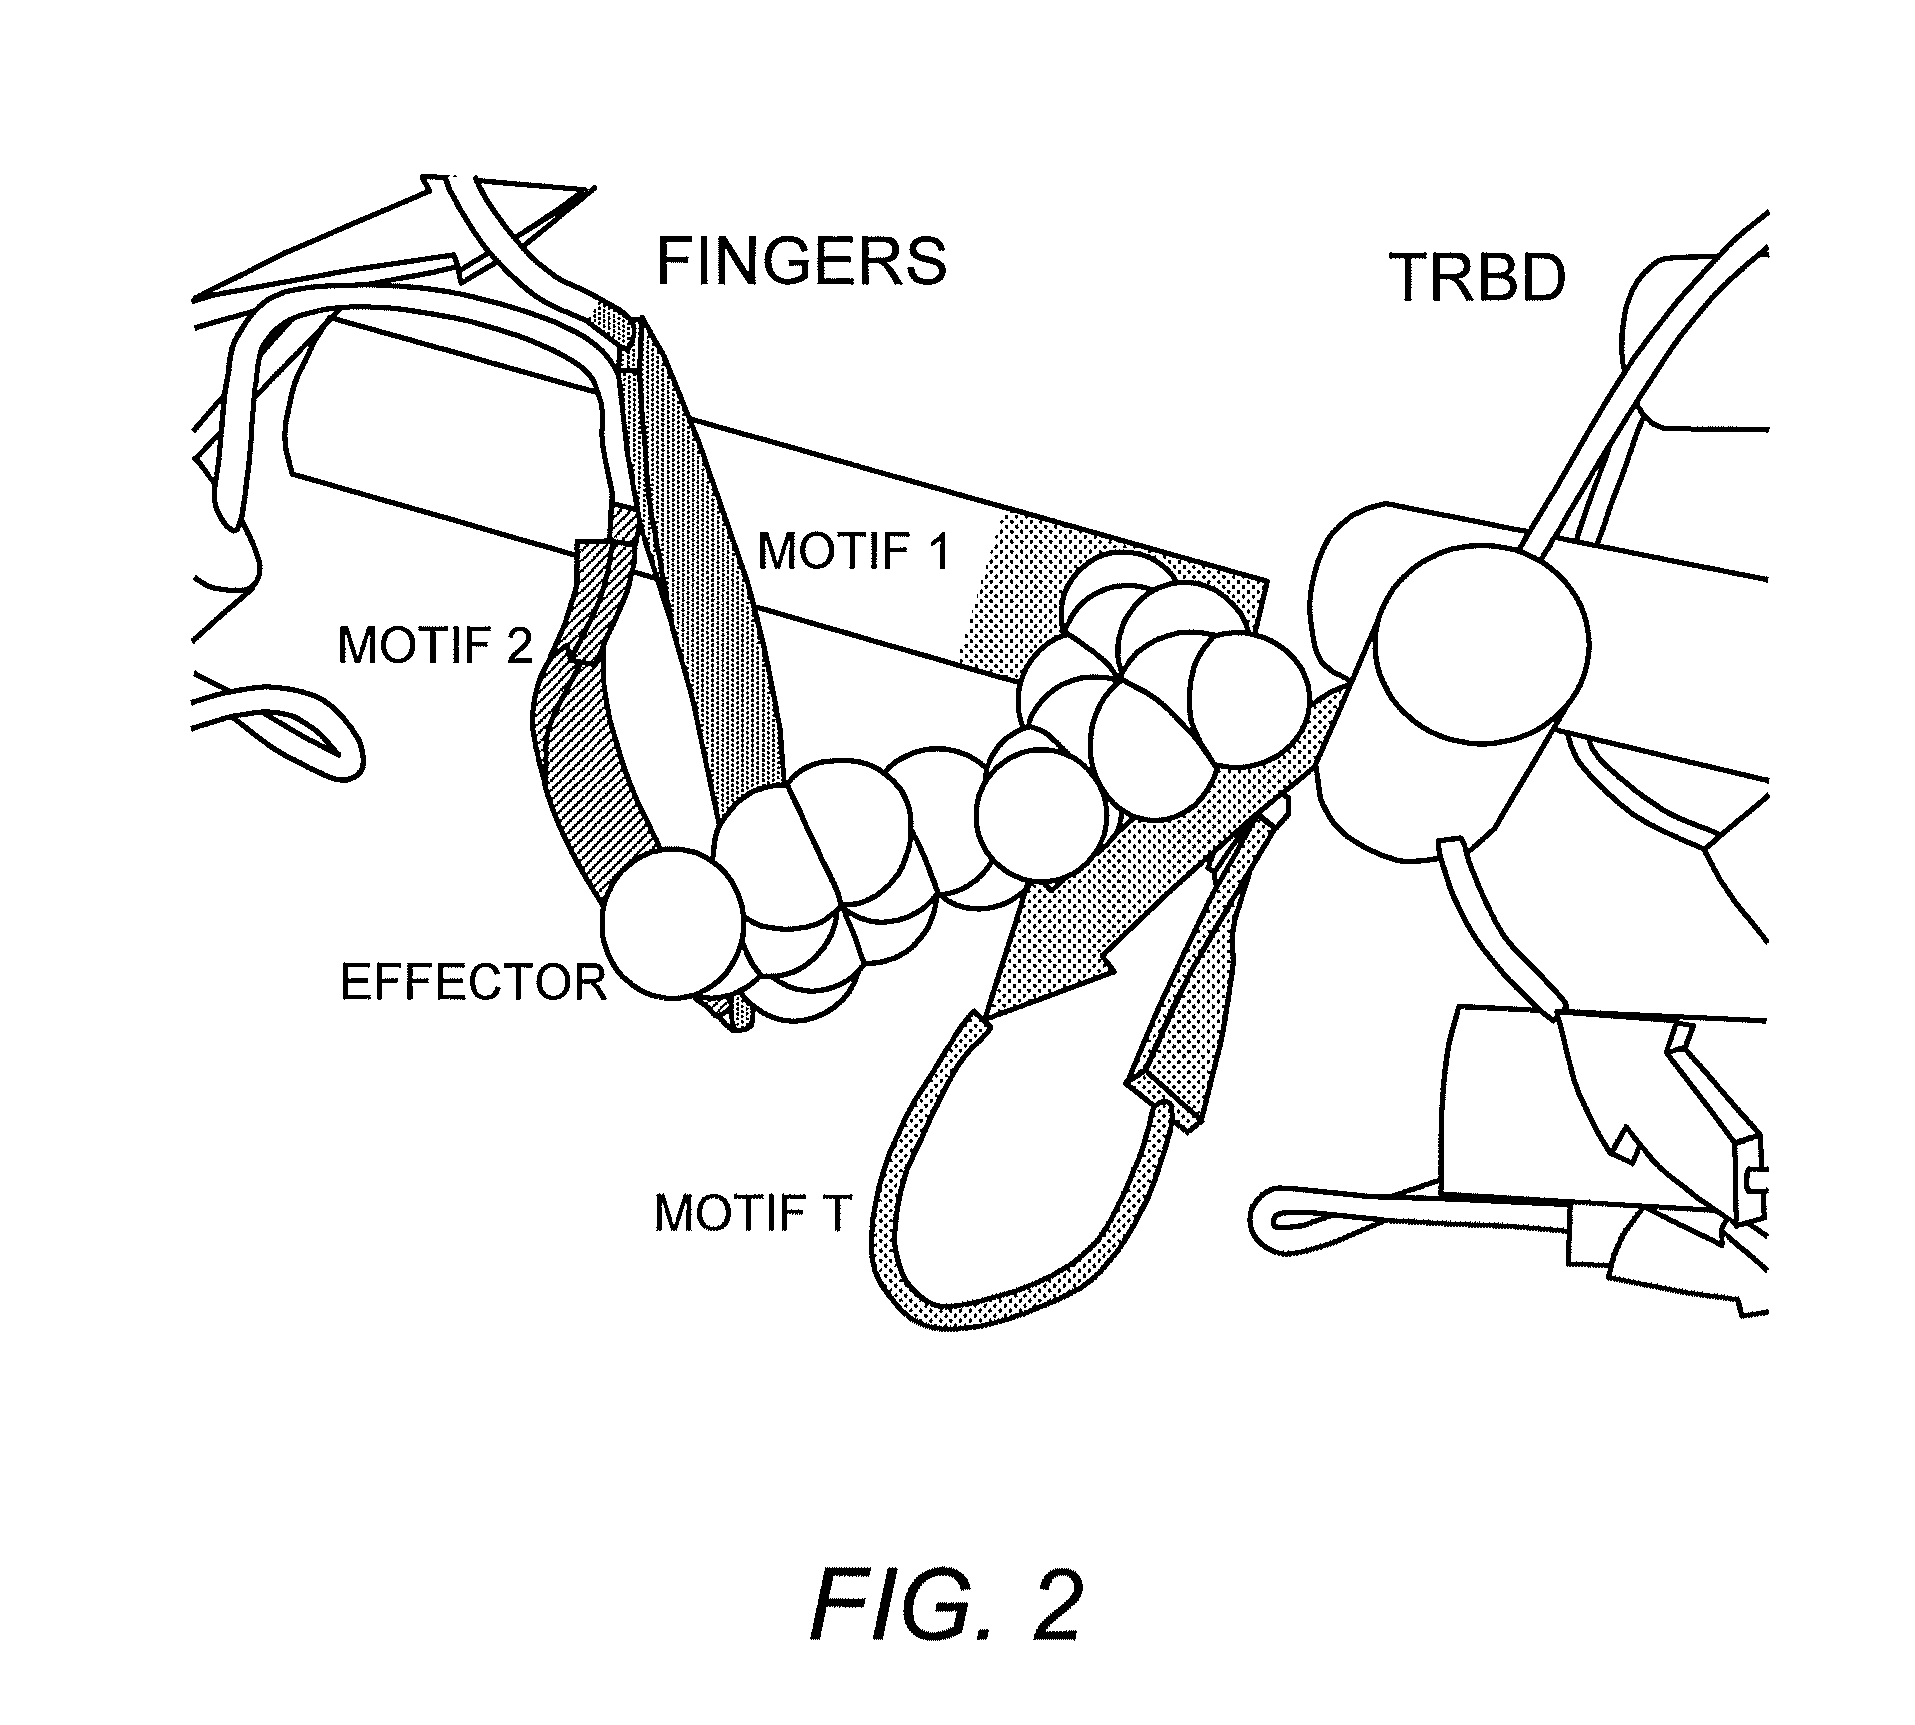 TRBD-Binding Effectors and Methods for Using the Same to Modulate Telomerase Activity